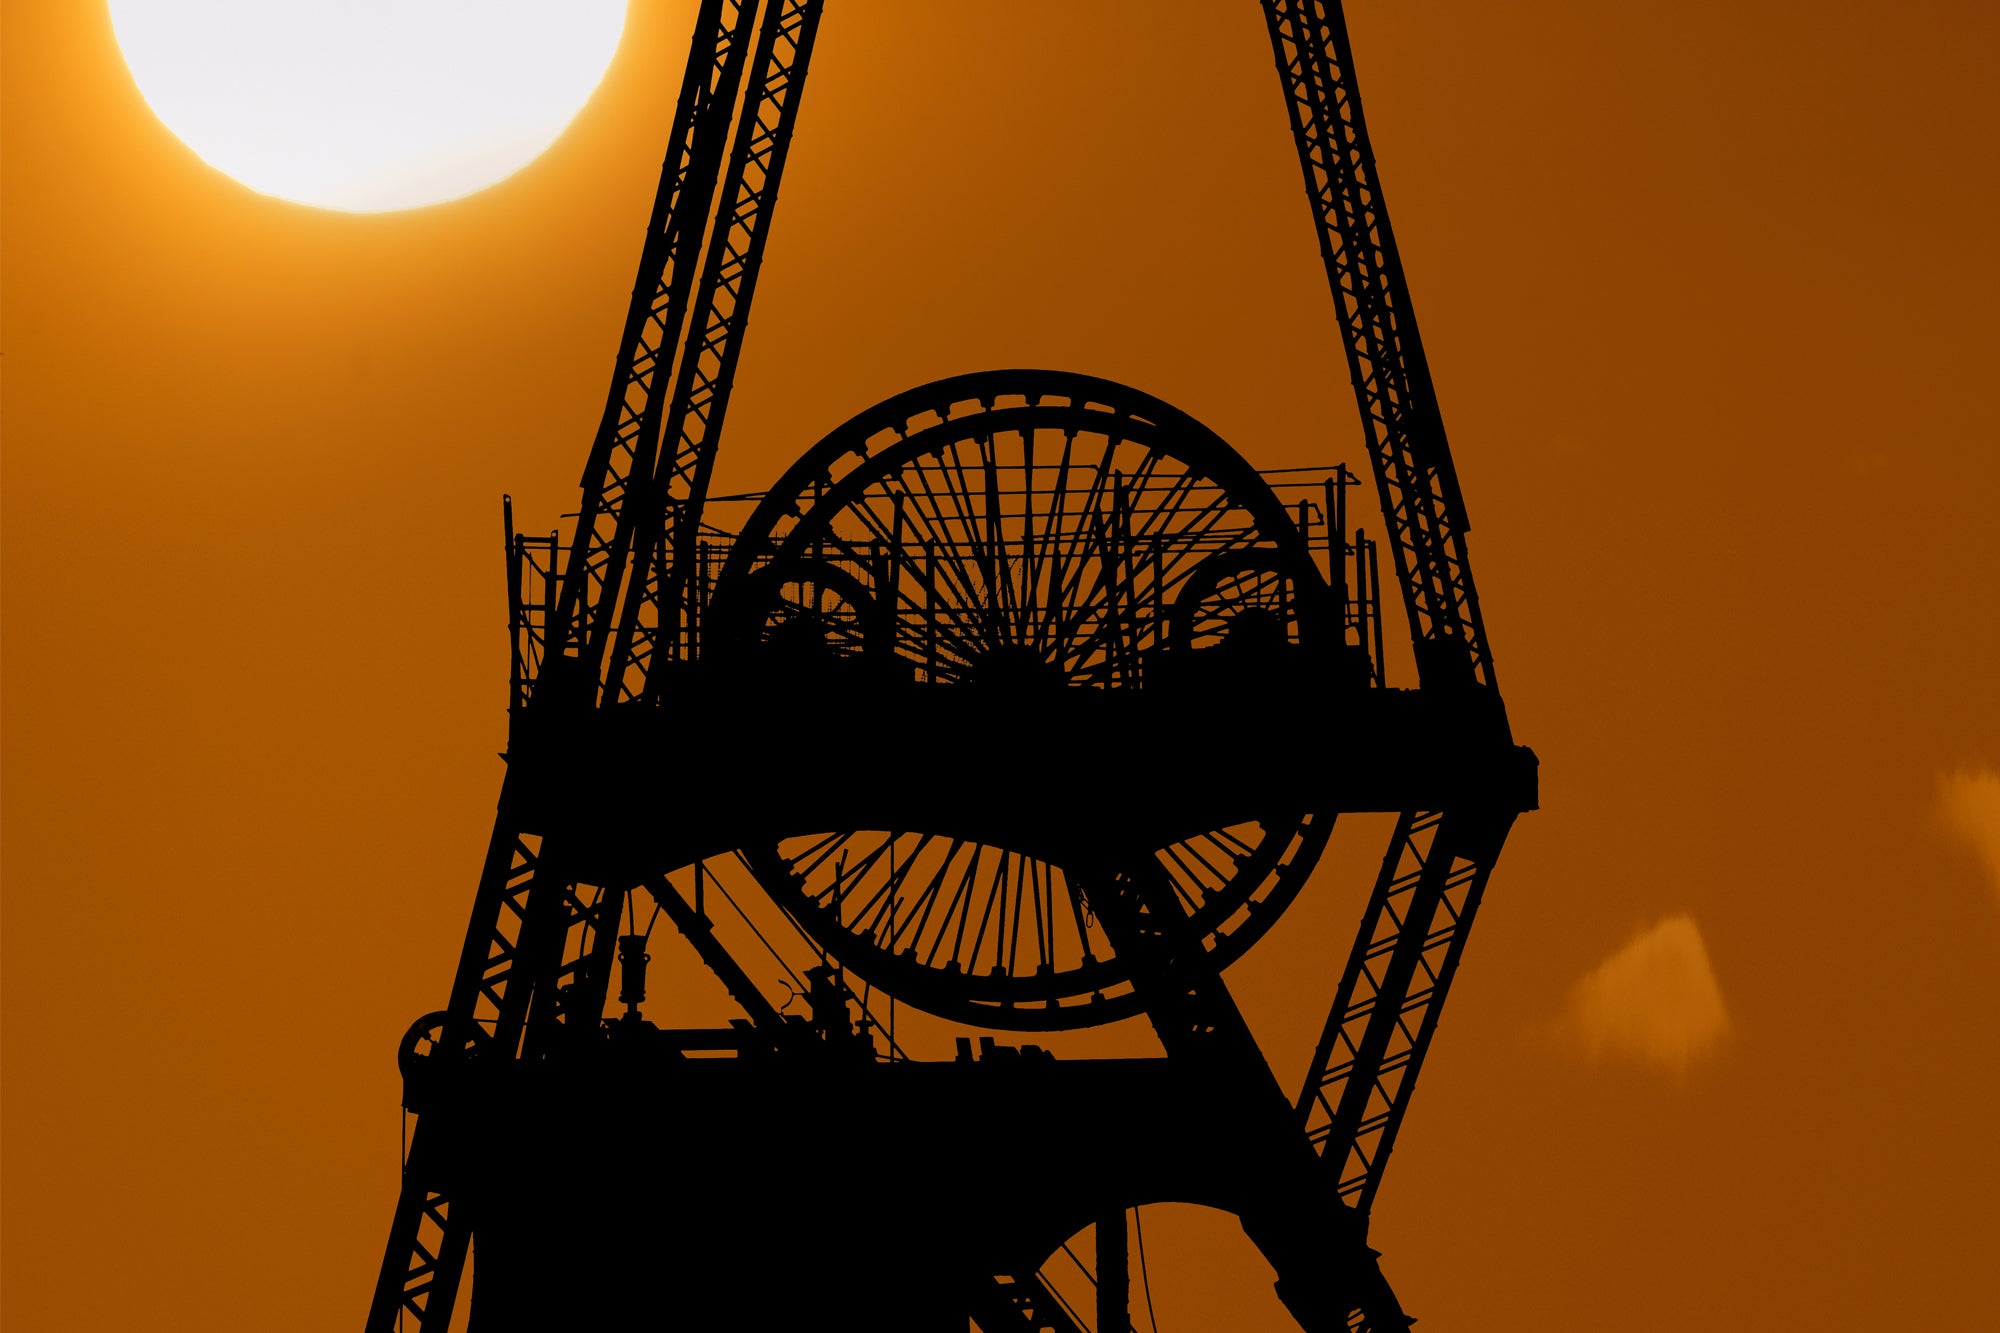 Pit wheel silhouette at sunset